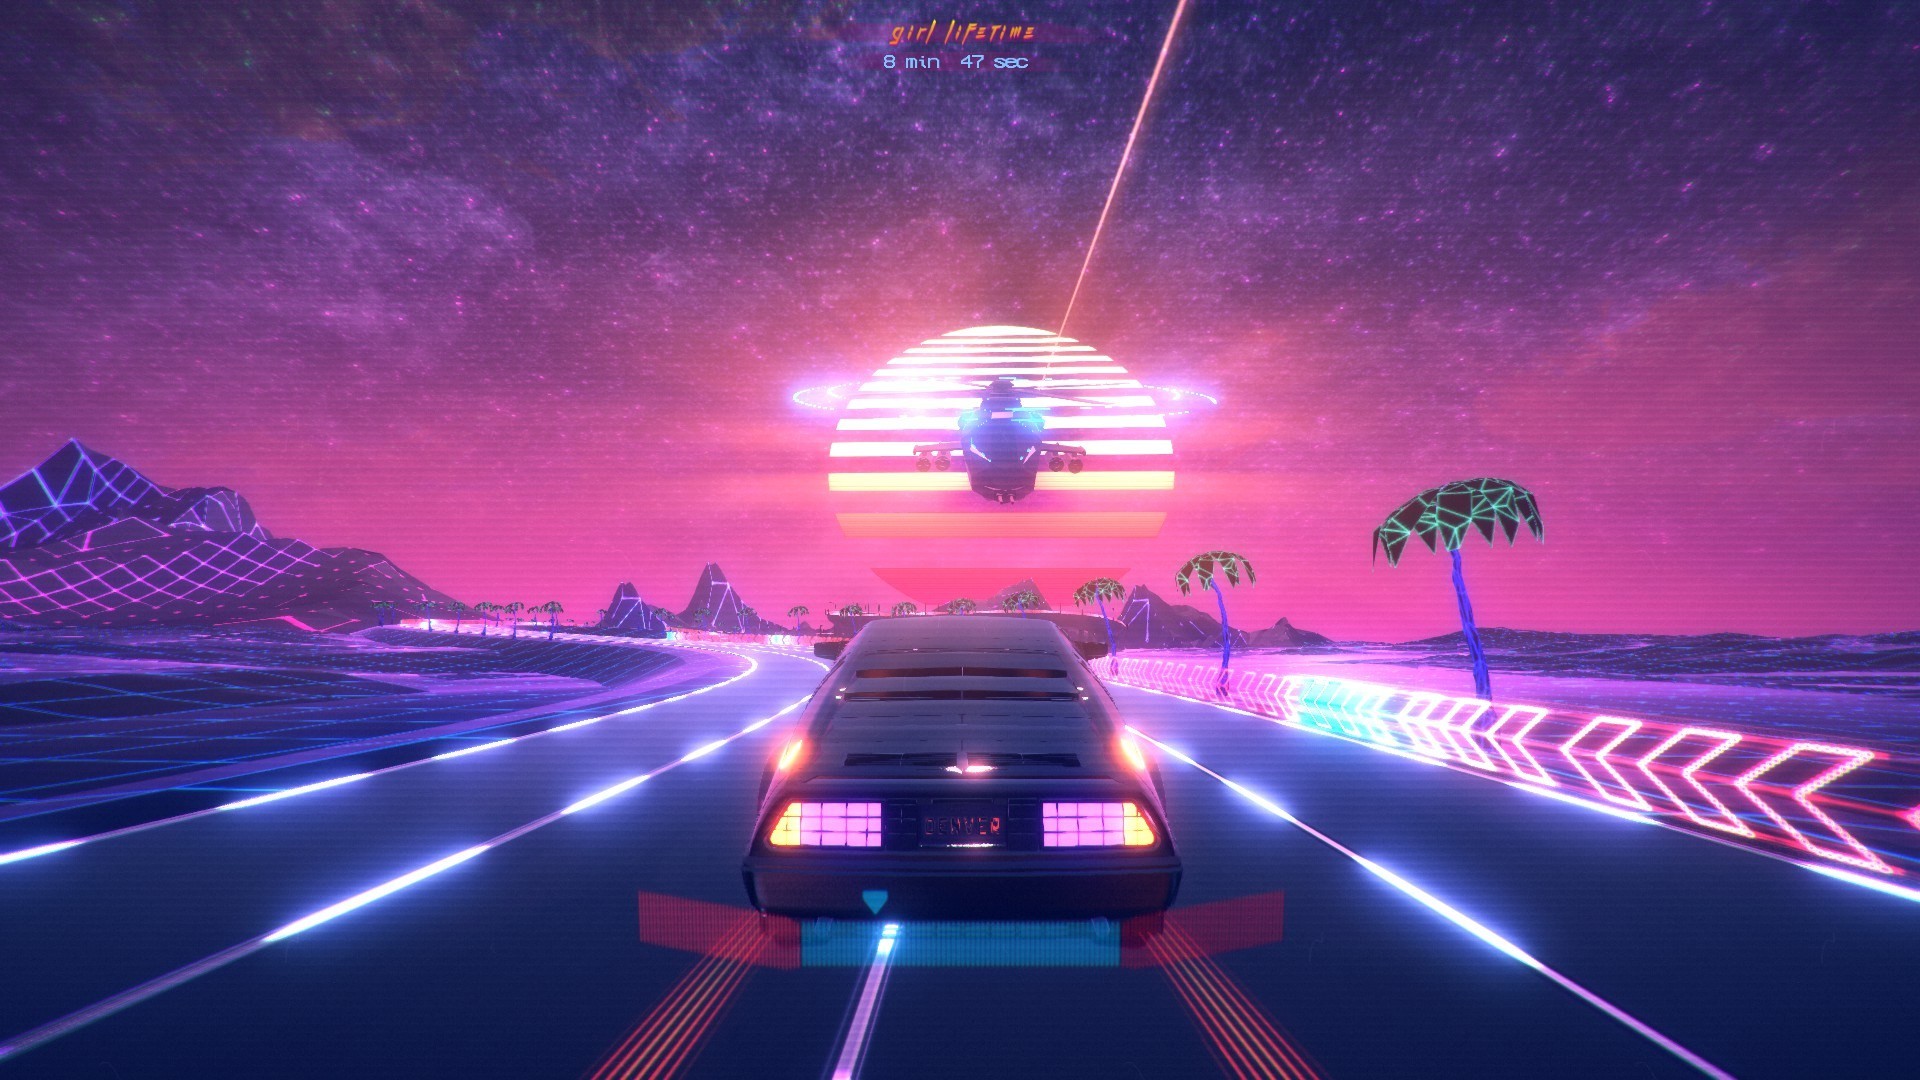 80S wallpaper ·① Download free amazing High Resolution ...